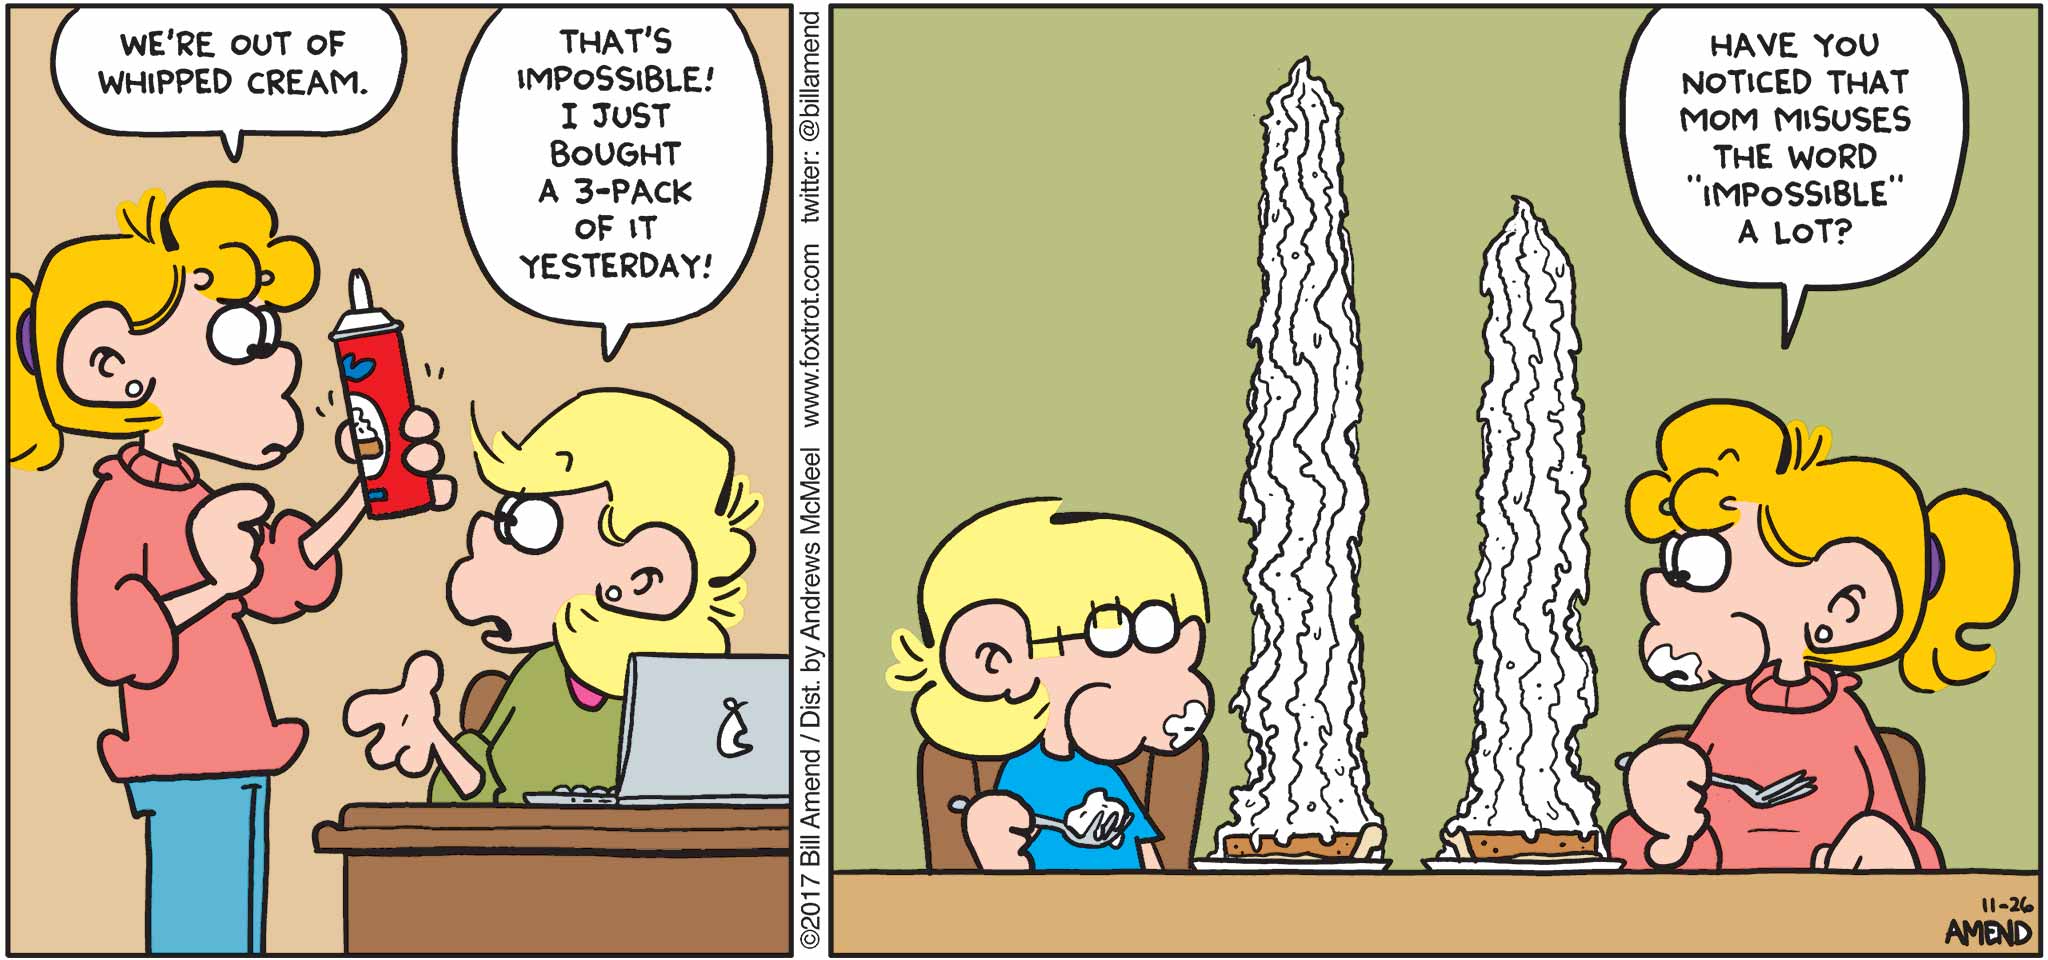 FoxTrot by Bill Amend - "Impossible" published November 26, 2017 - Paige: We're out of whipped cream. Andy: That's impossible! I just bought a 3-pack of it yesterday! Paige: Have you noticed that mom misuses the word "impossible" a lot?